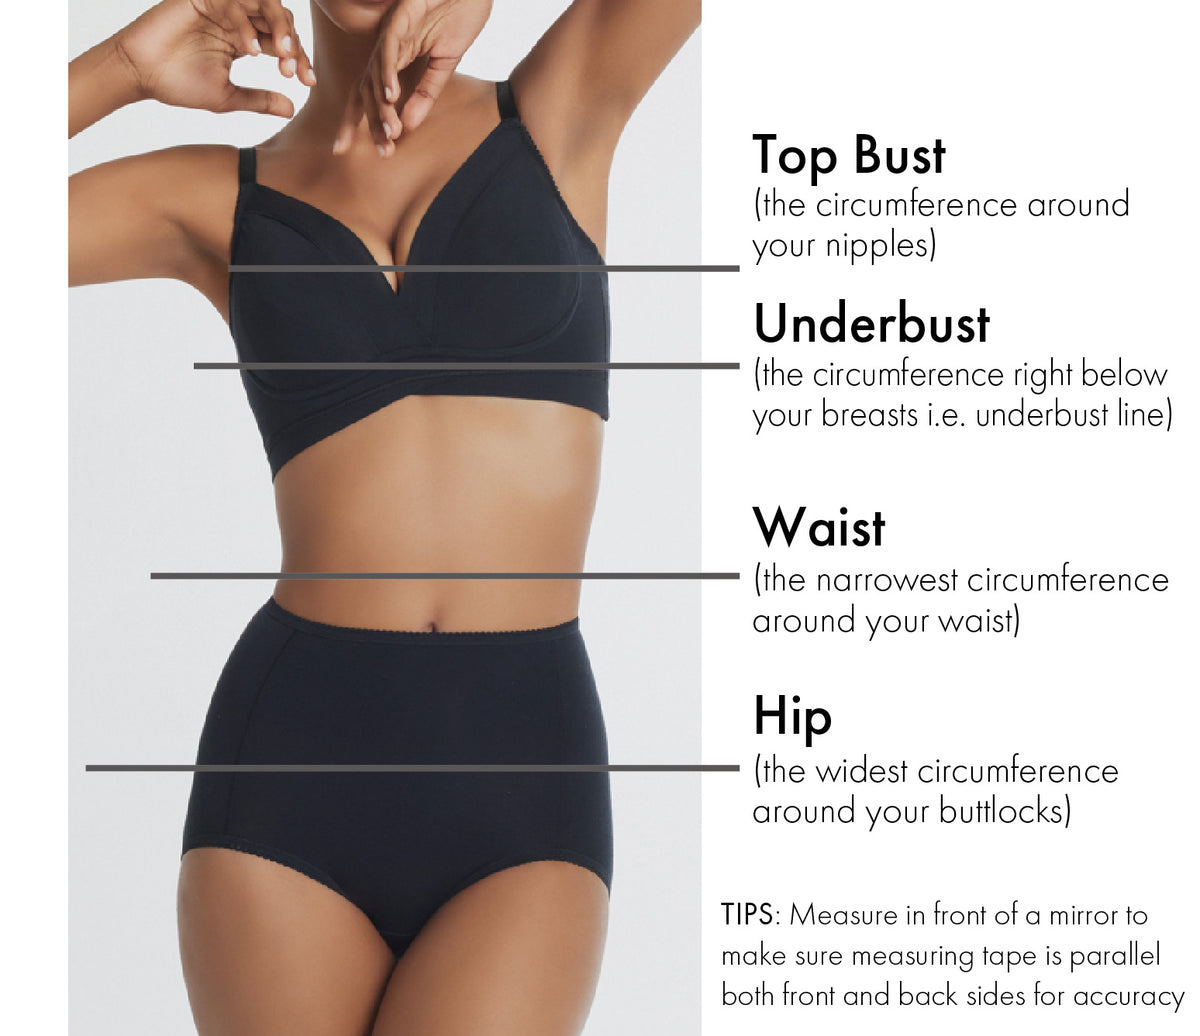 Best Bras For Large Busts, According To Fitting Guide